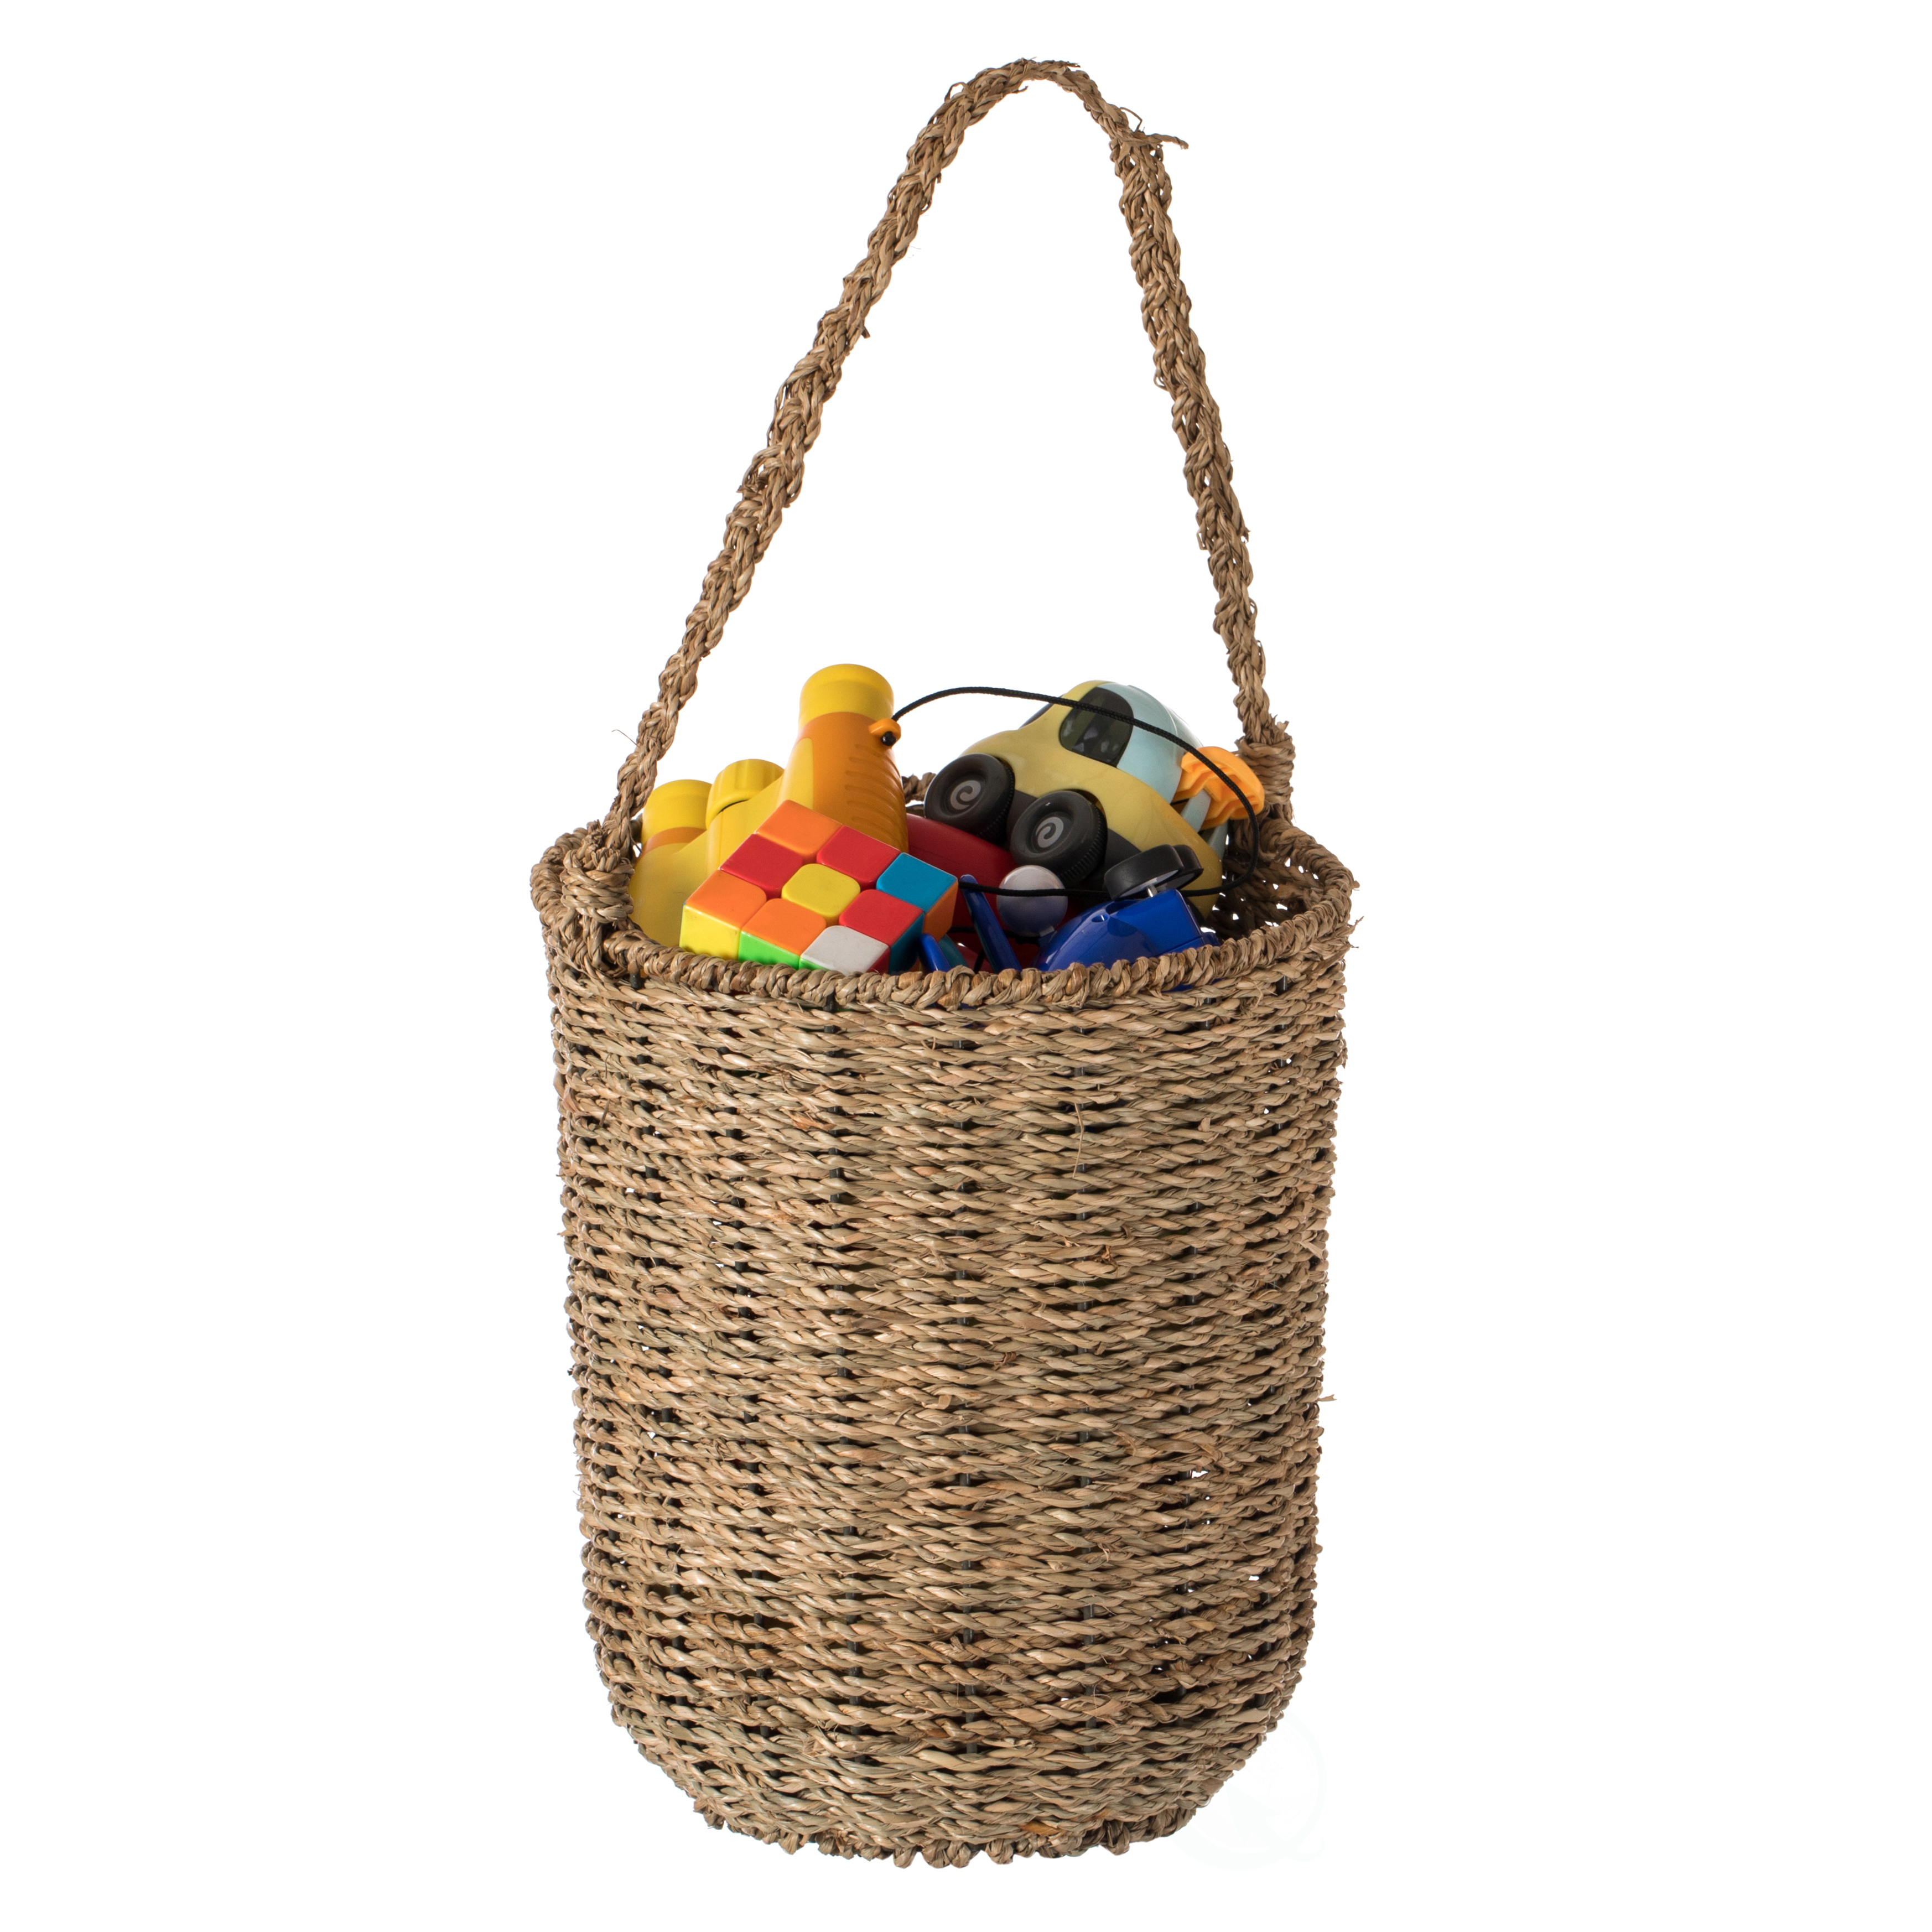 Decorative Woven Natural Seagrass Storage Basket With Built In Woven Handles